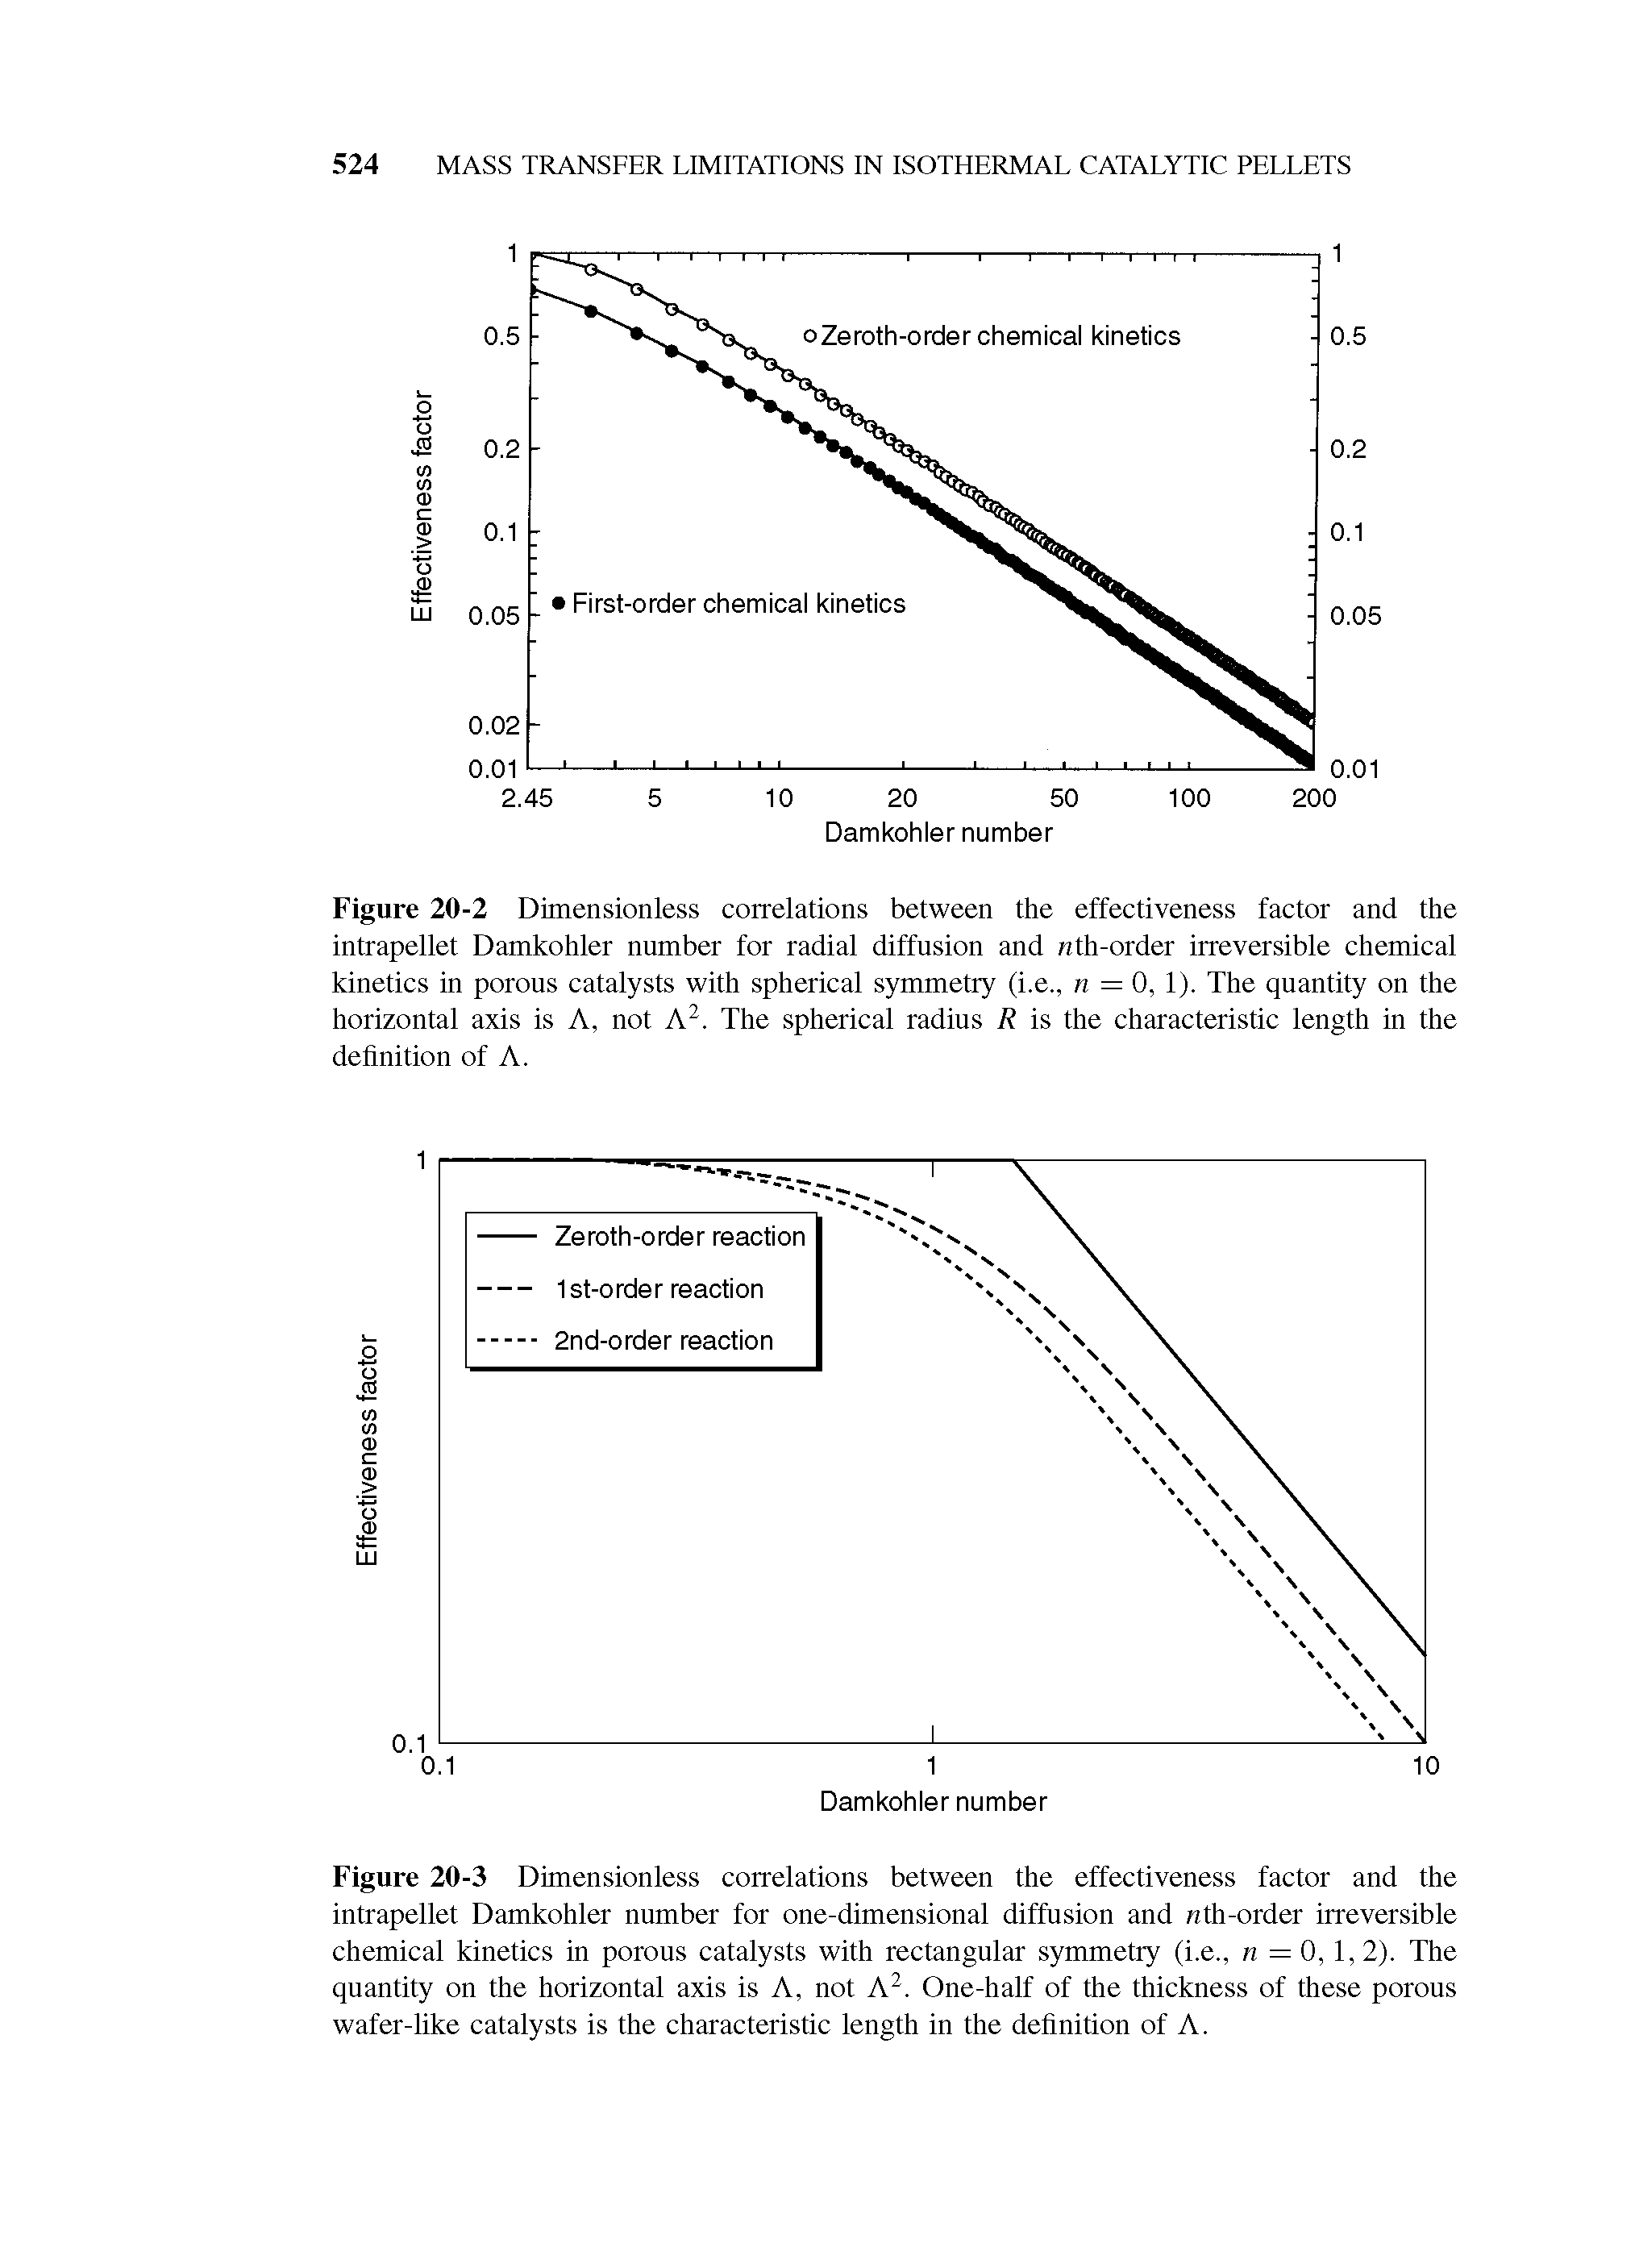 Figure 20-2 Dimensionless correlations between the effectiveness factor and the intrapellet Damkohler number for radial diffusion and nth-order irreversible chemical kinetics in porous catalysts with spherical symmetry (i.e., n = 0, 1). The quantity on the horizontal axis is A, not A. The spherical radius R is the characteristic length in the definition of A.